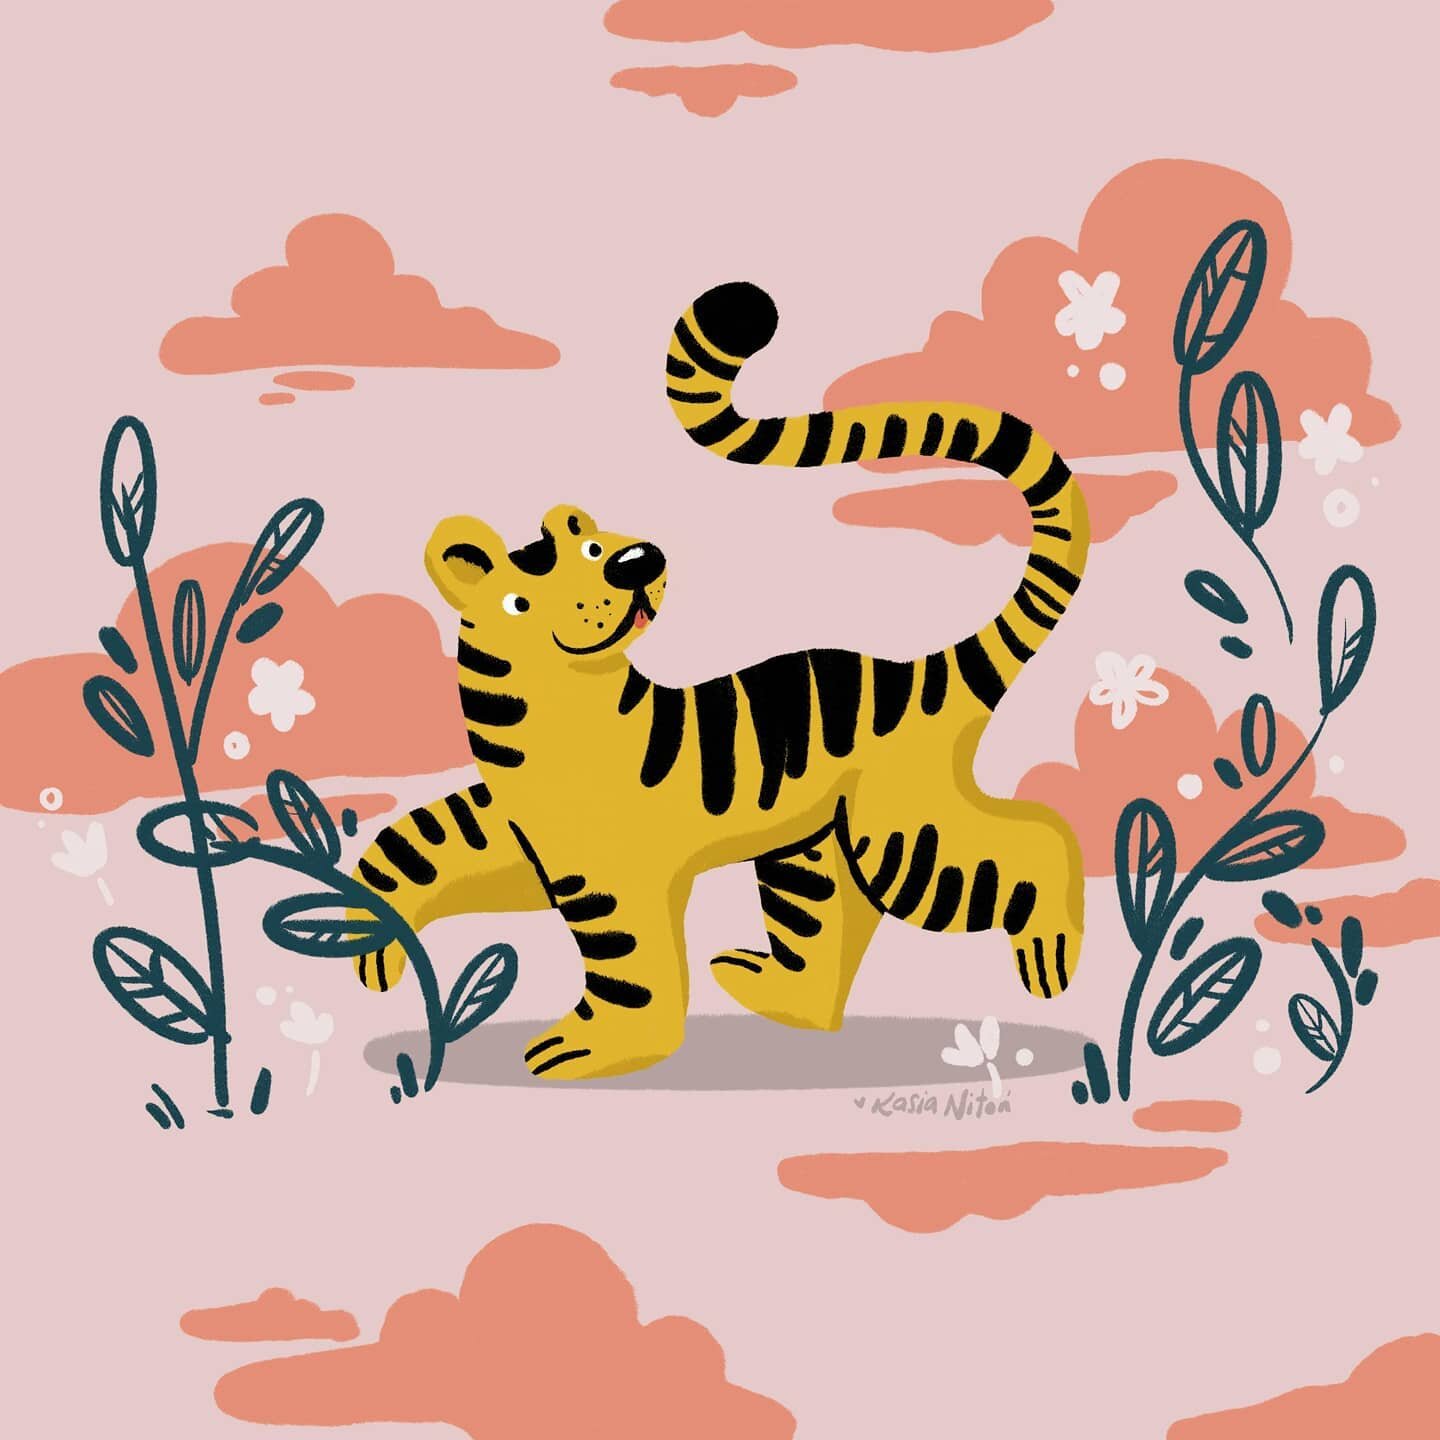 Doodled this tiger /cloud kitty up last night and I love its derpy little blep 🐯☁️👅

I feel like there's been a lot of clouds in my work lately ☁️☁️☁️ 

--

🌞🌞🌞
 #illustrationnow #illustration #illustrator #canadianillustrator #tiger #cloudkitty